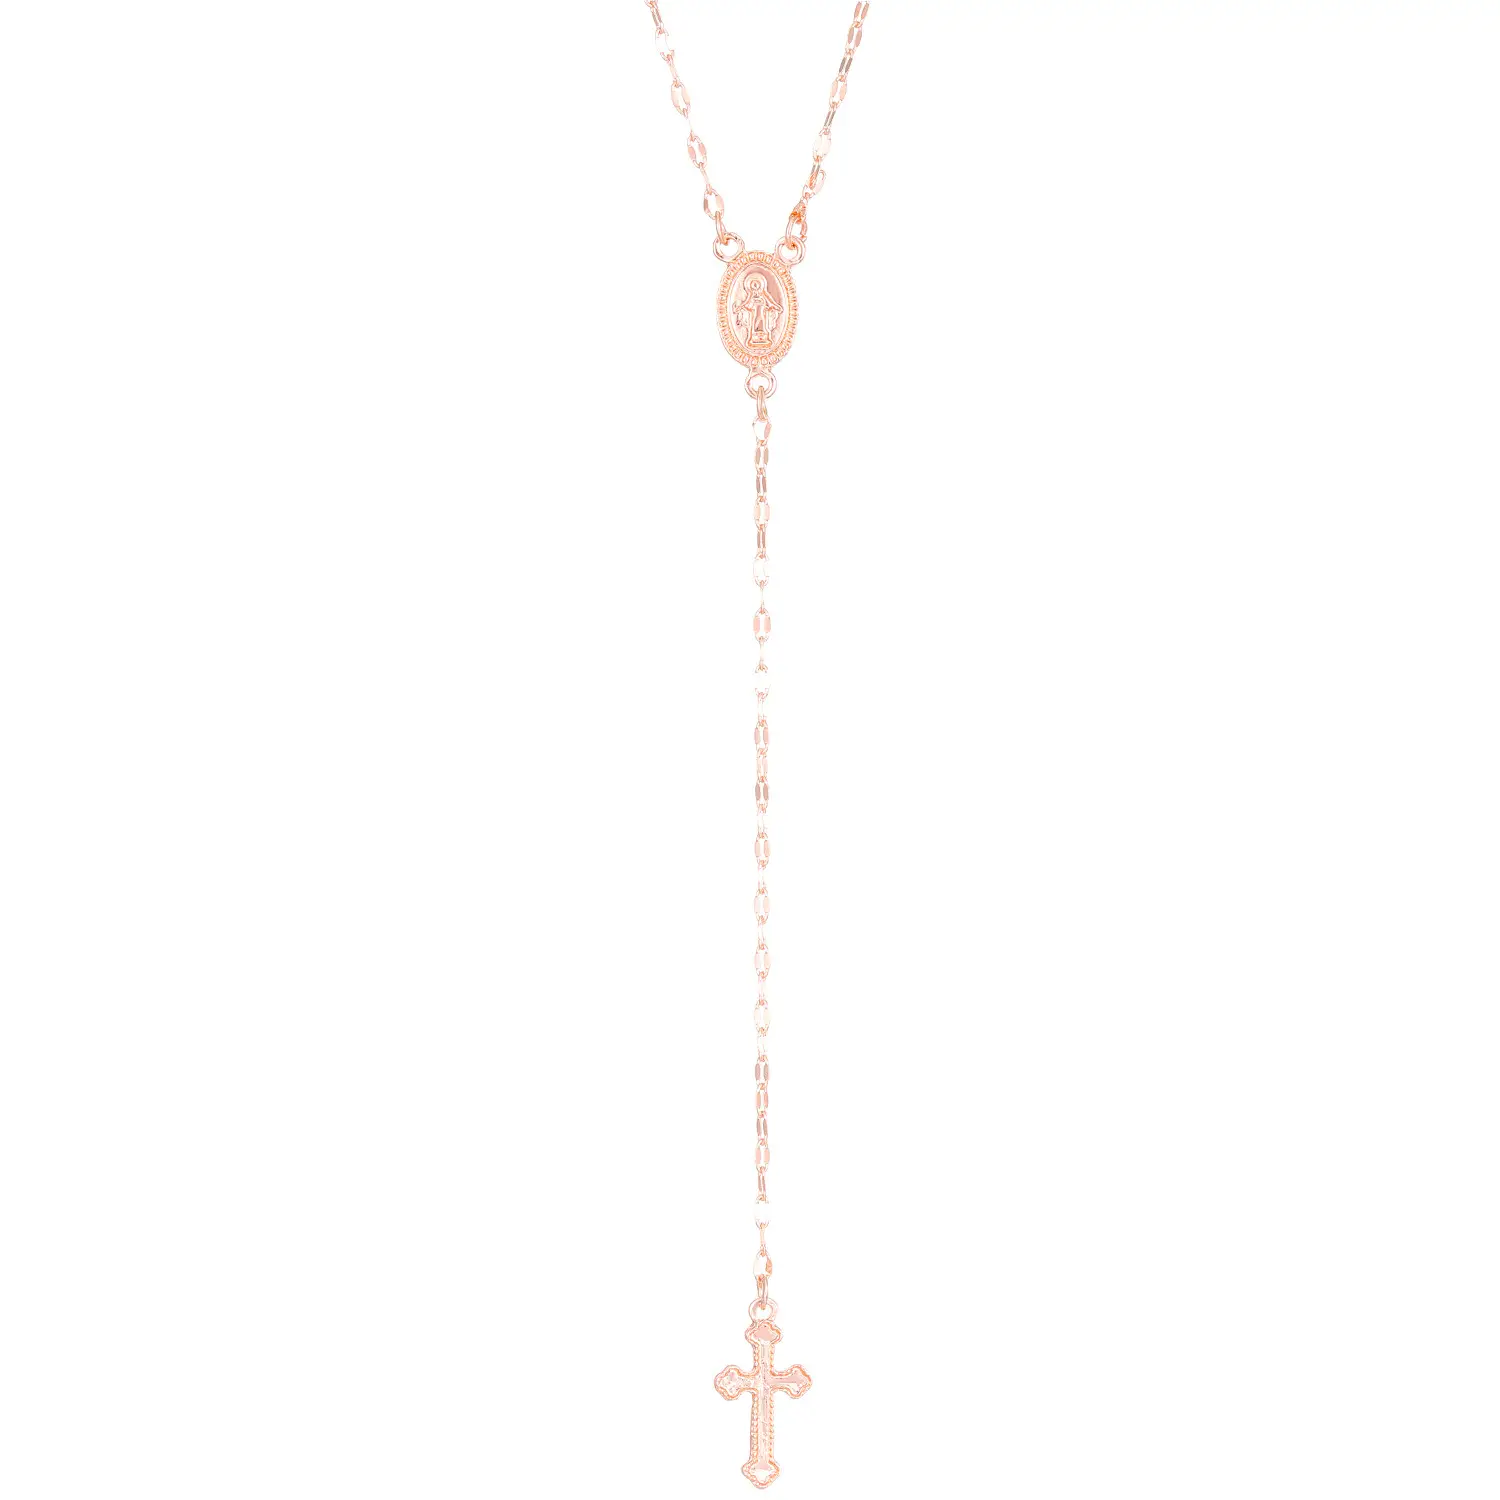 Cross long chain necklaces are popular Women's Easter trend accessories Sexy fringe Madonna pendant